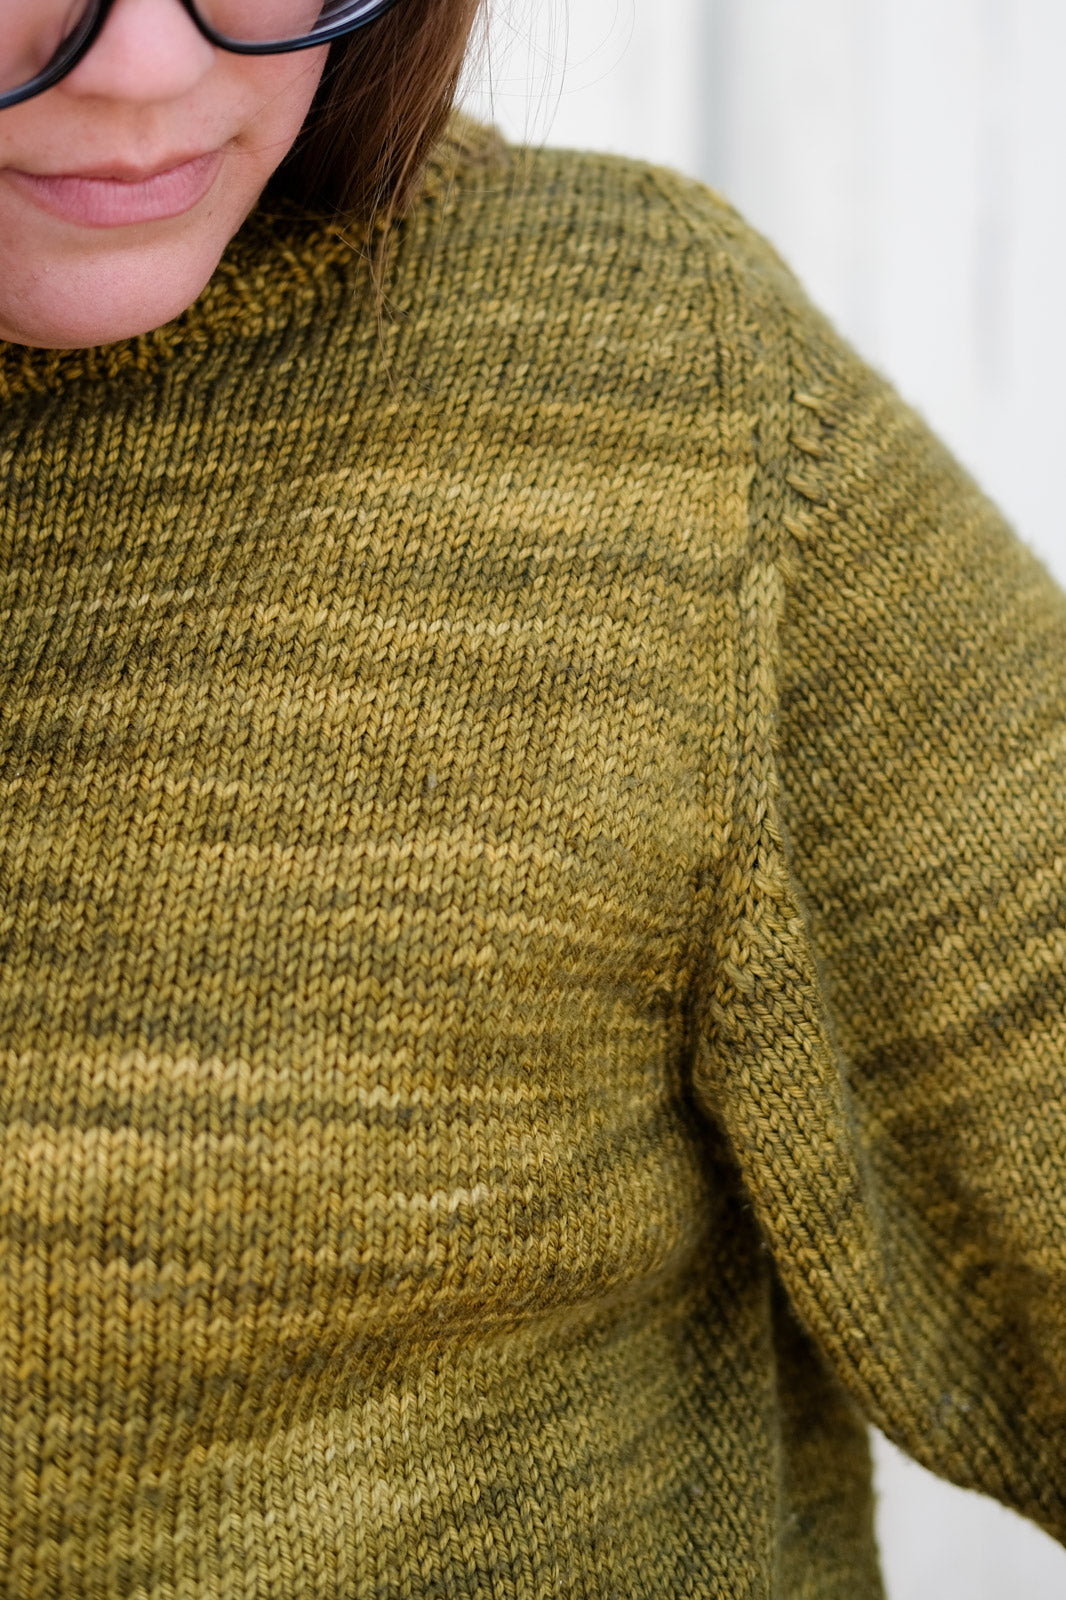 Ample Armhole on the Cline Sweater